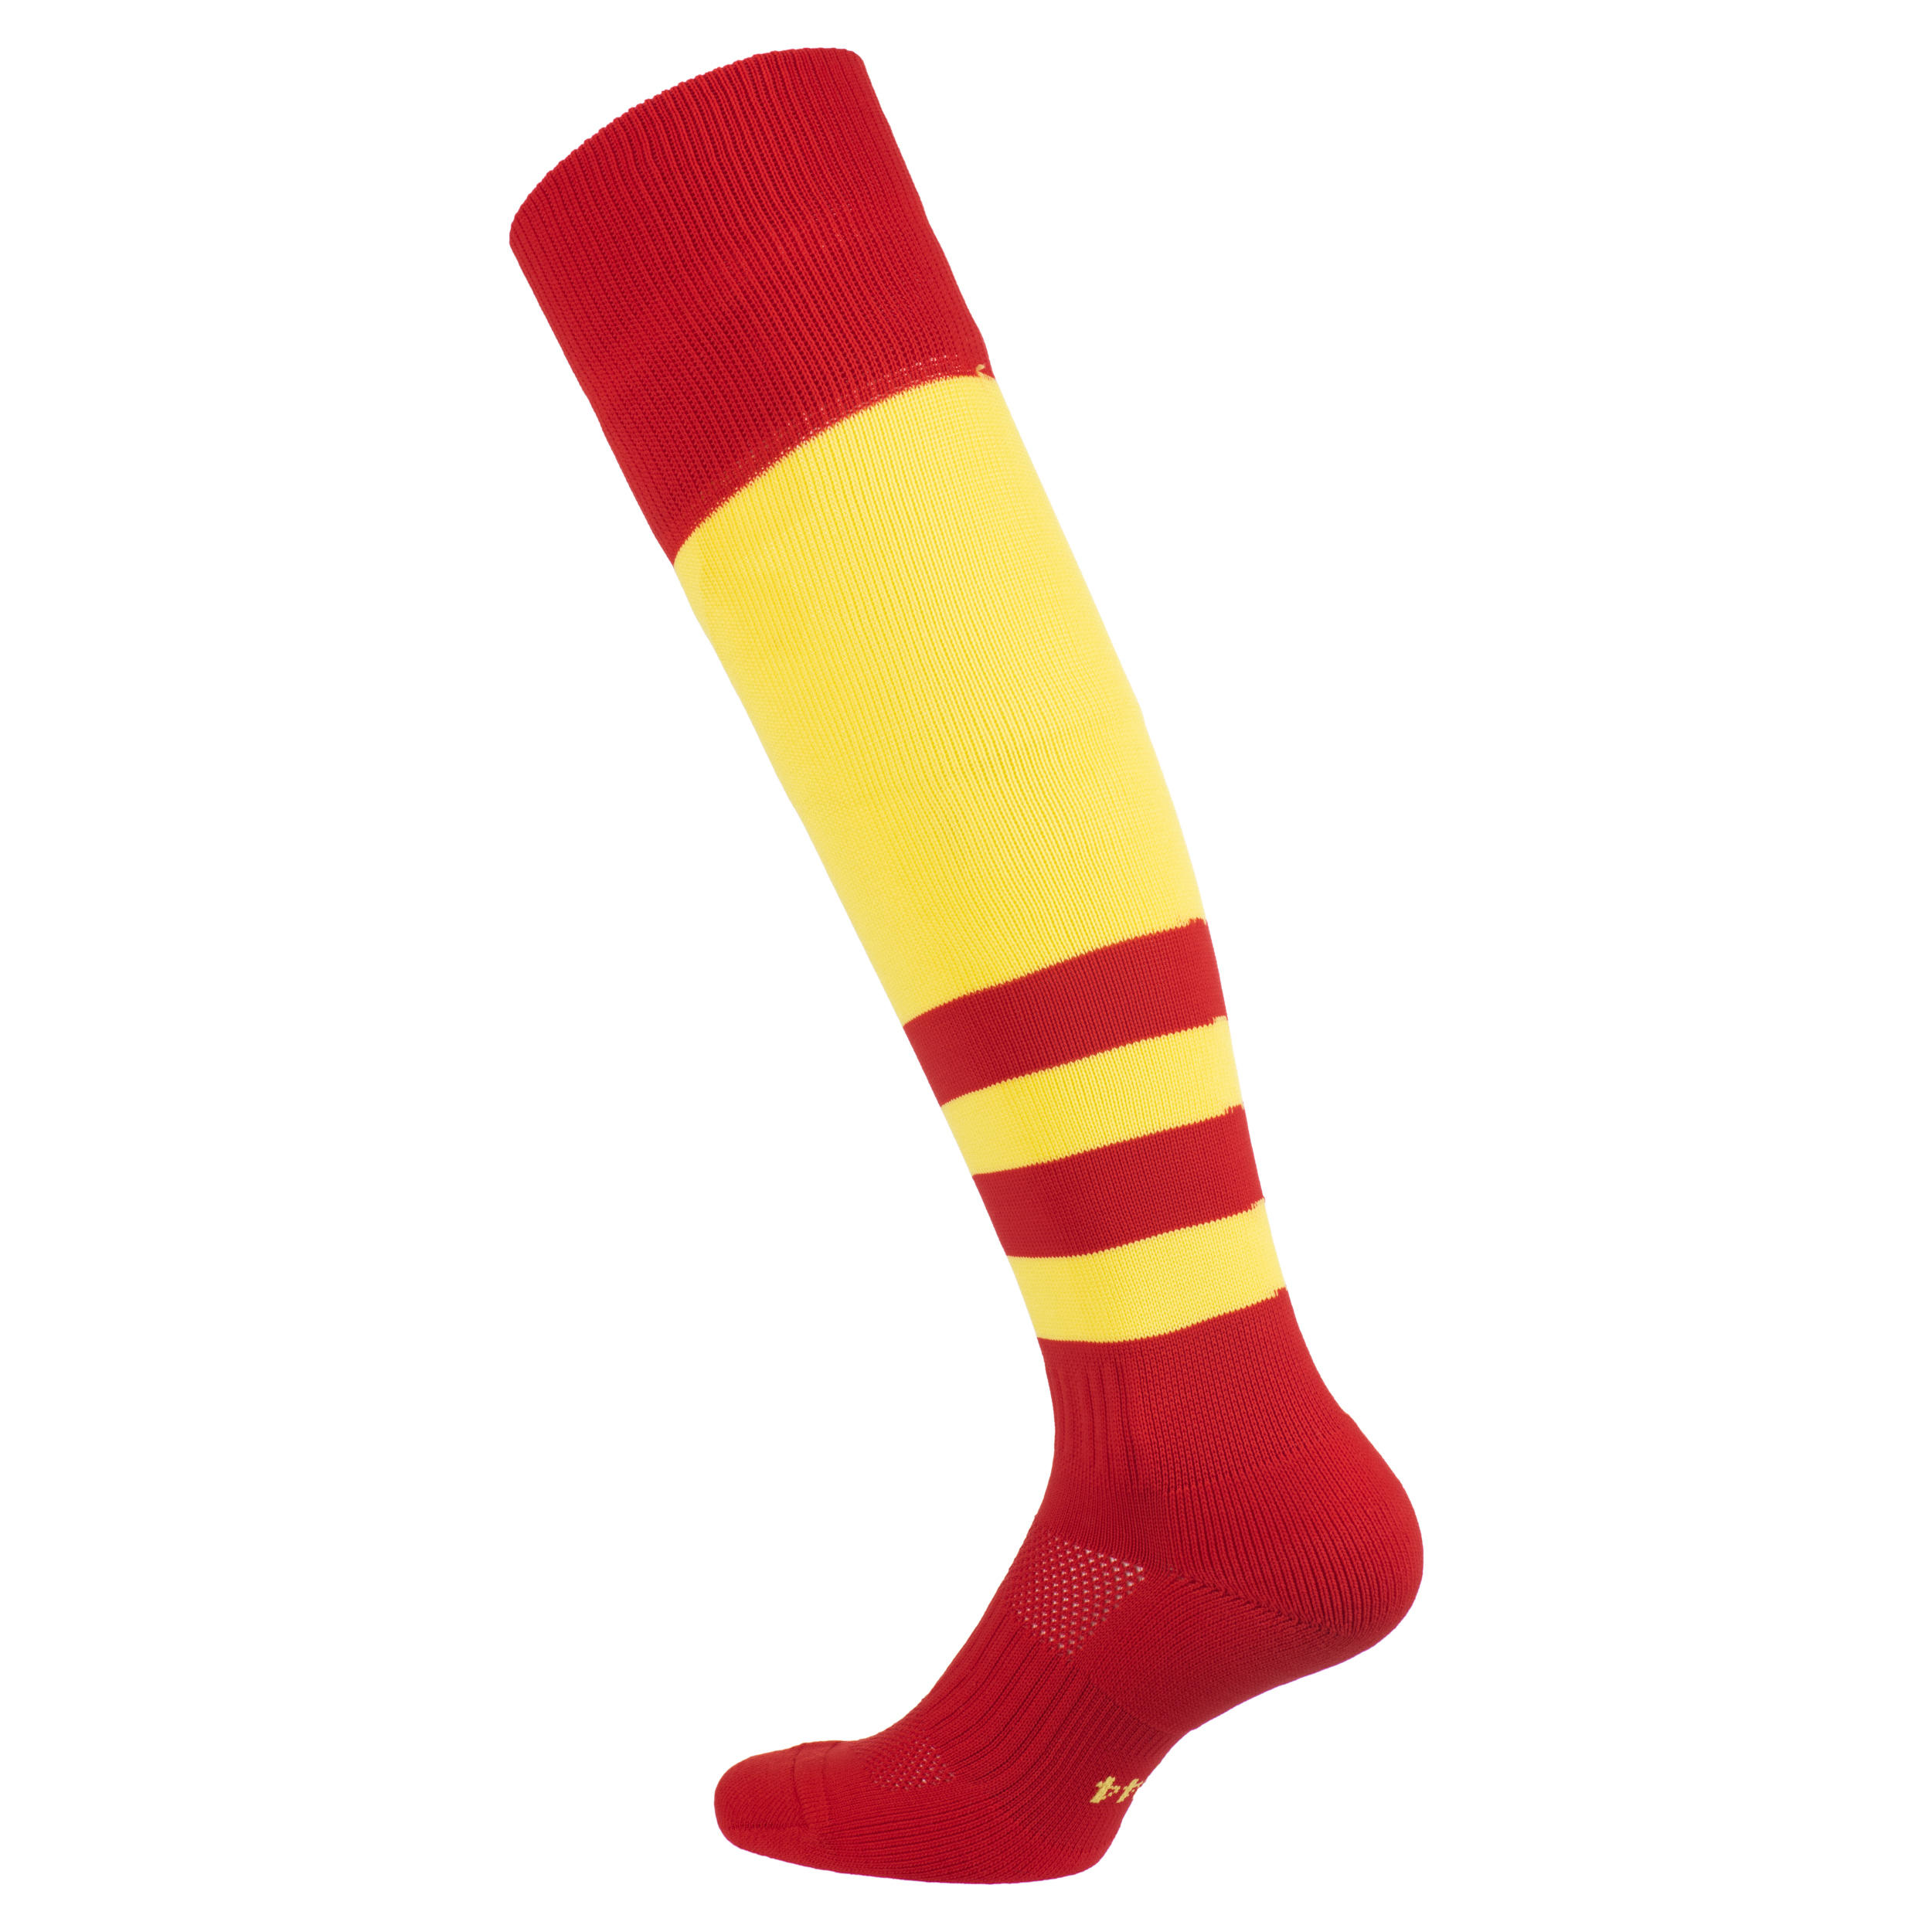 Men's/Women's High Rugby Socks R500 - Red/Yellow 2/5